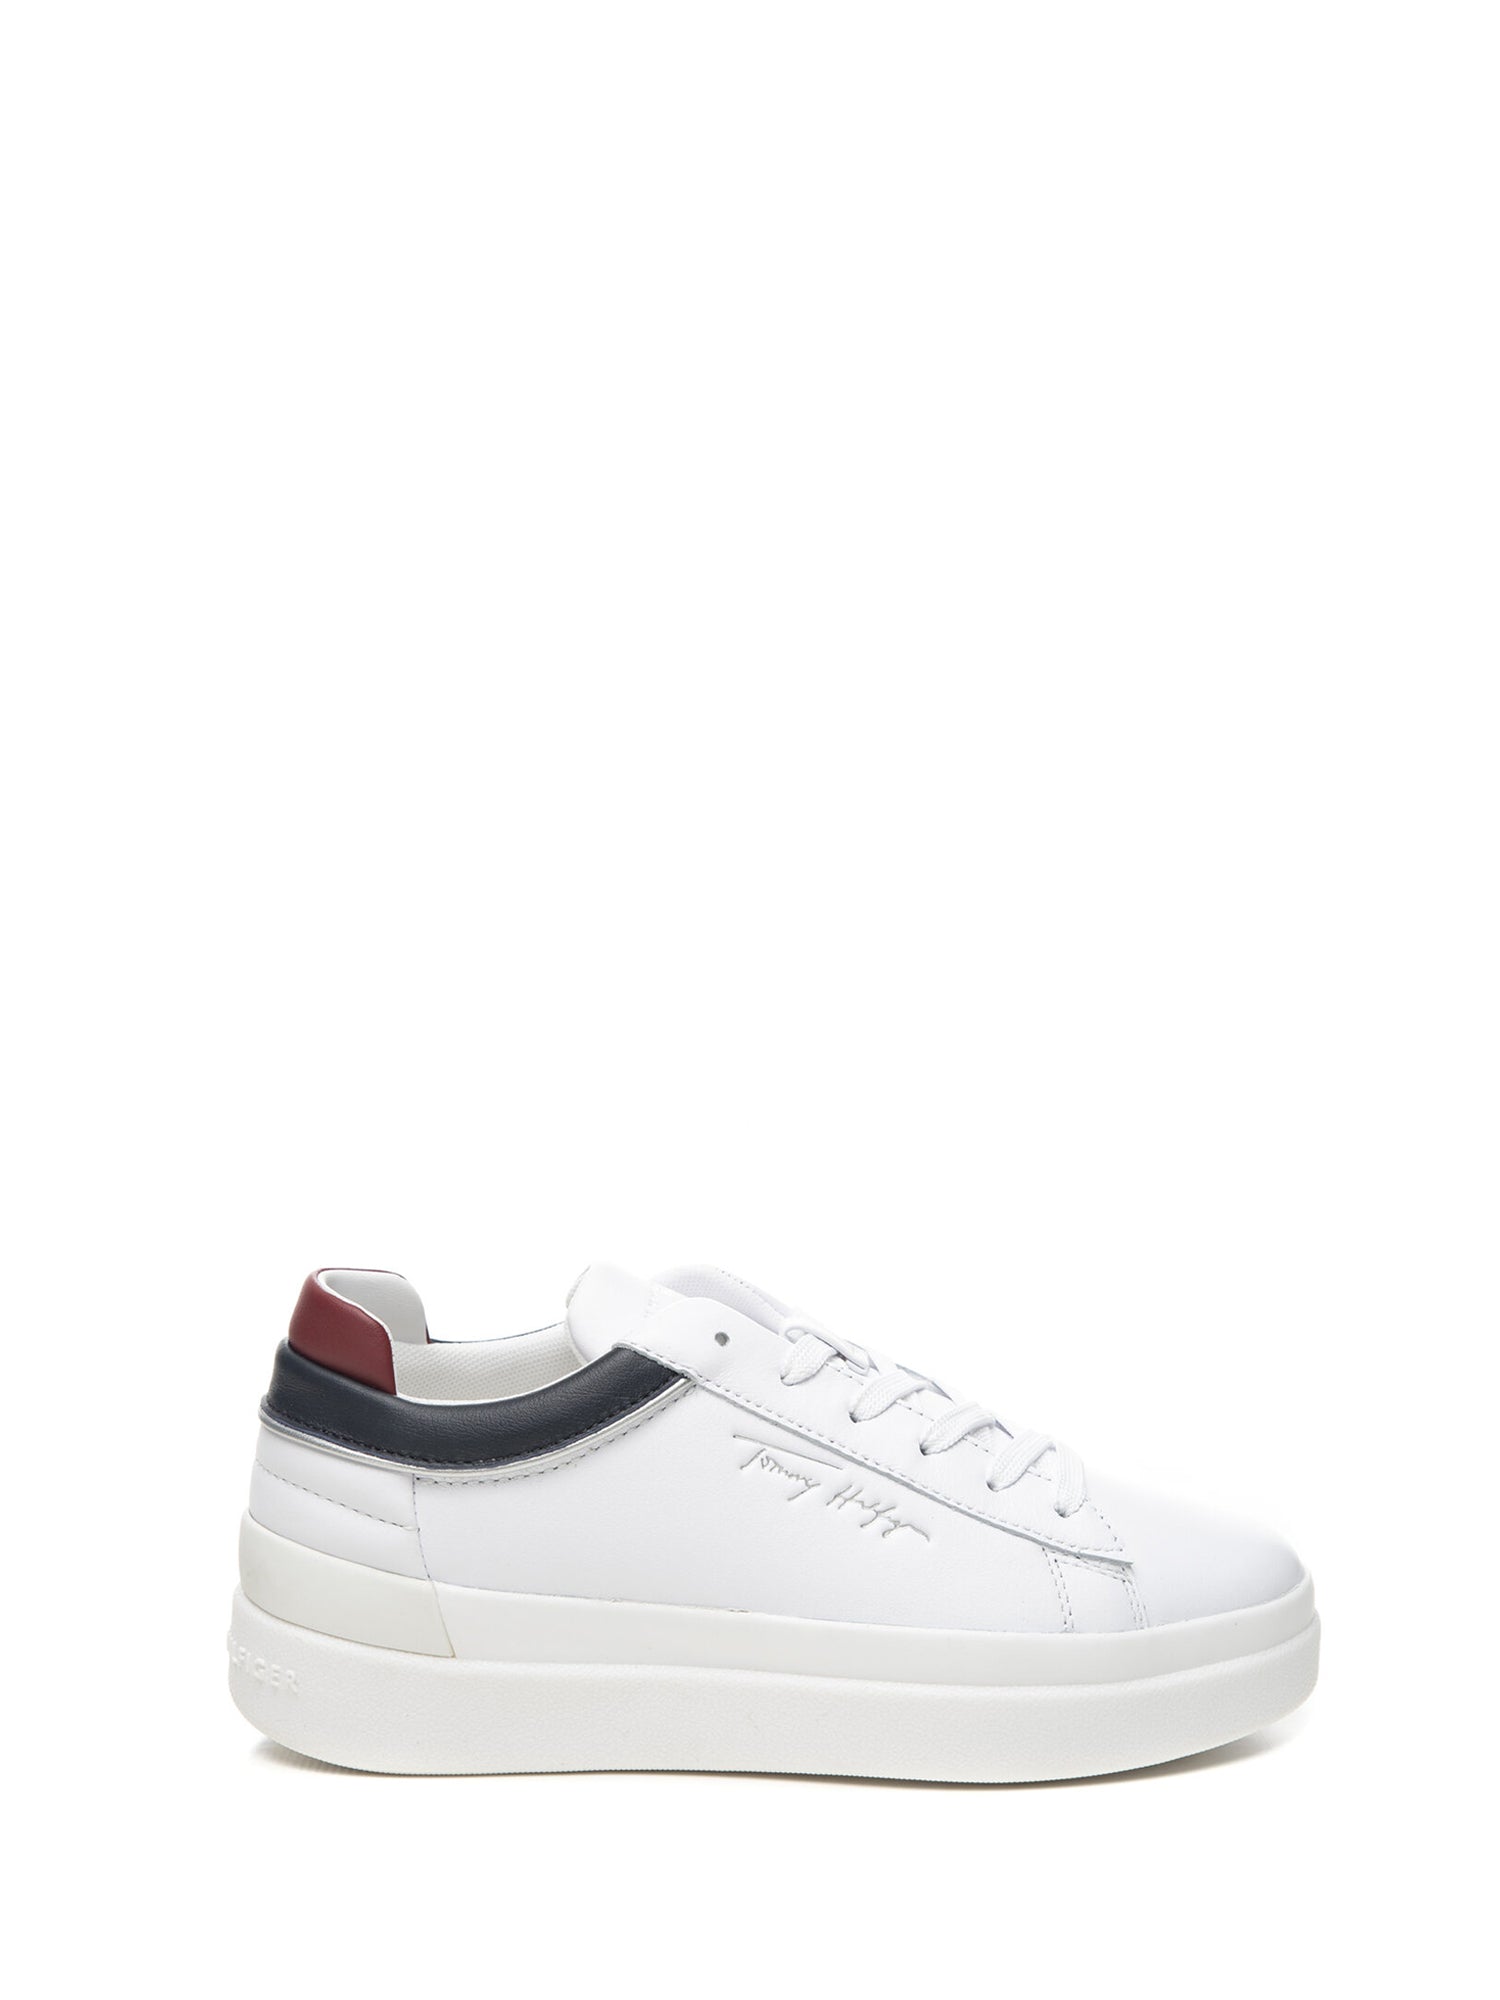 TOMMY HILFIGER SNEAKERS IN PELLE COLOR BLOCK BIANCO